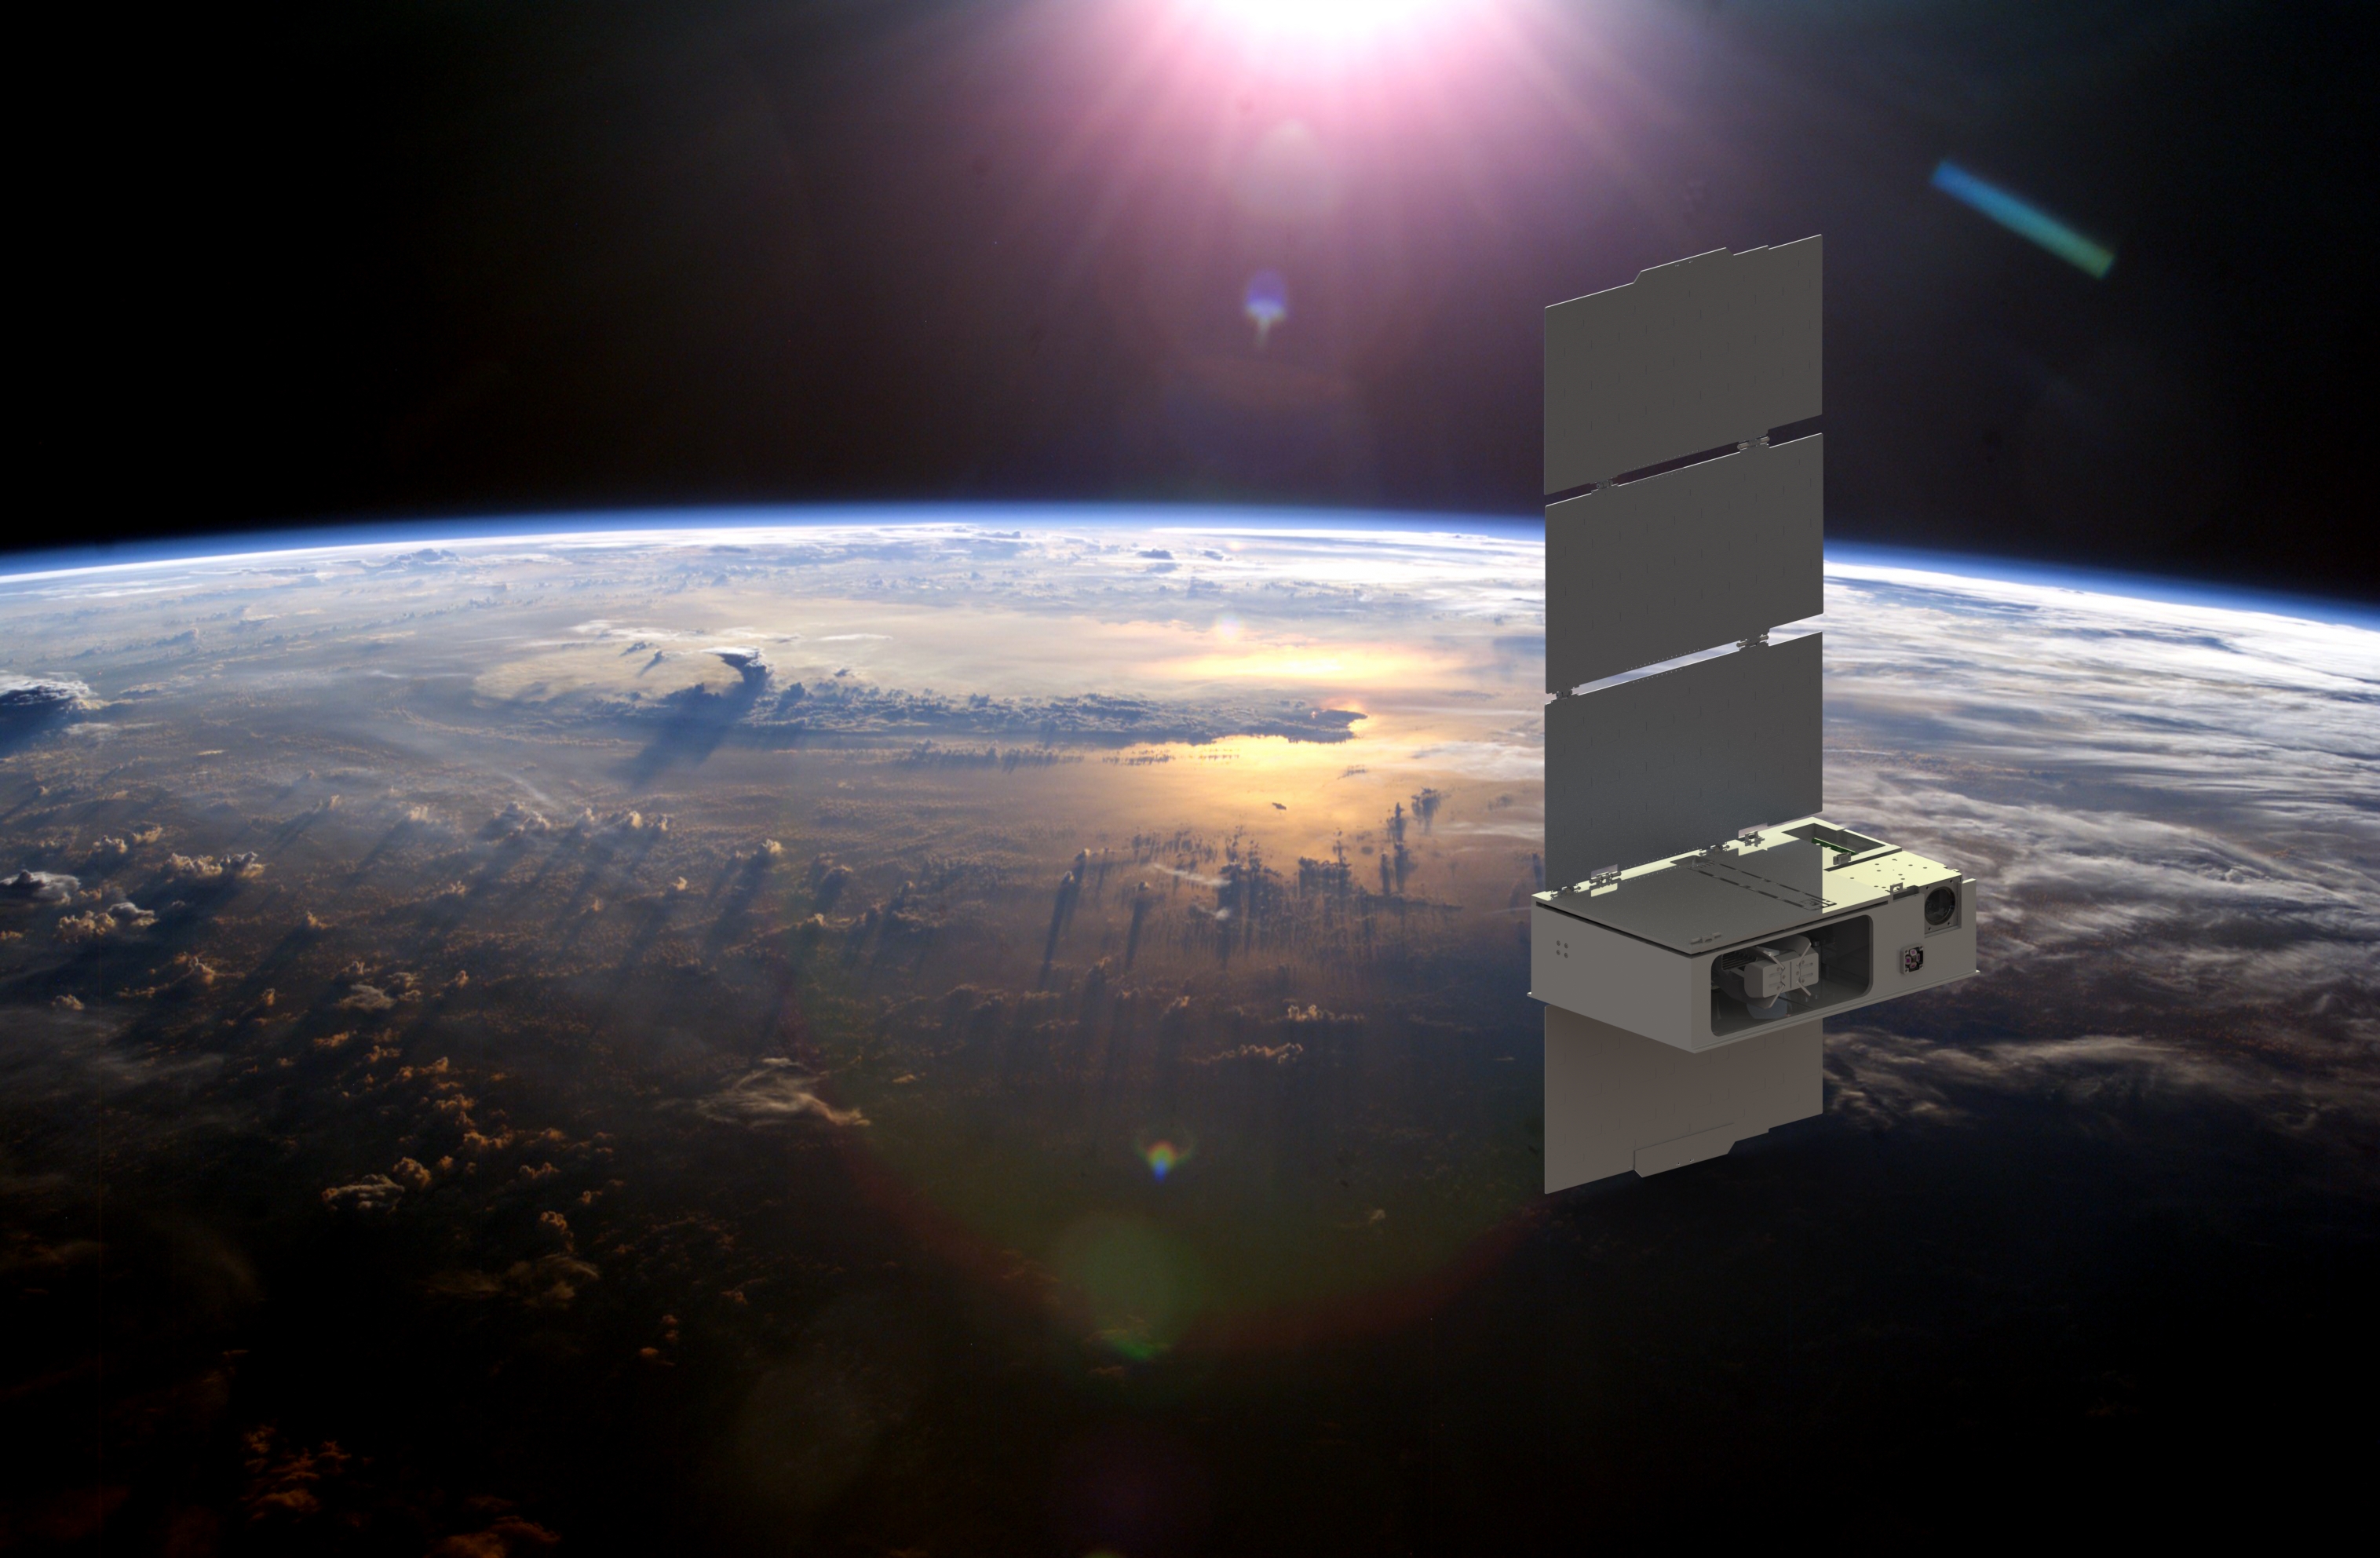 A satellite above planet Earth; the satellite consists of a rectangular box with four flat rectangular solar array panels attached.